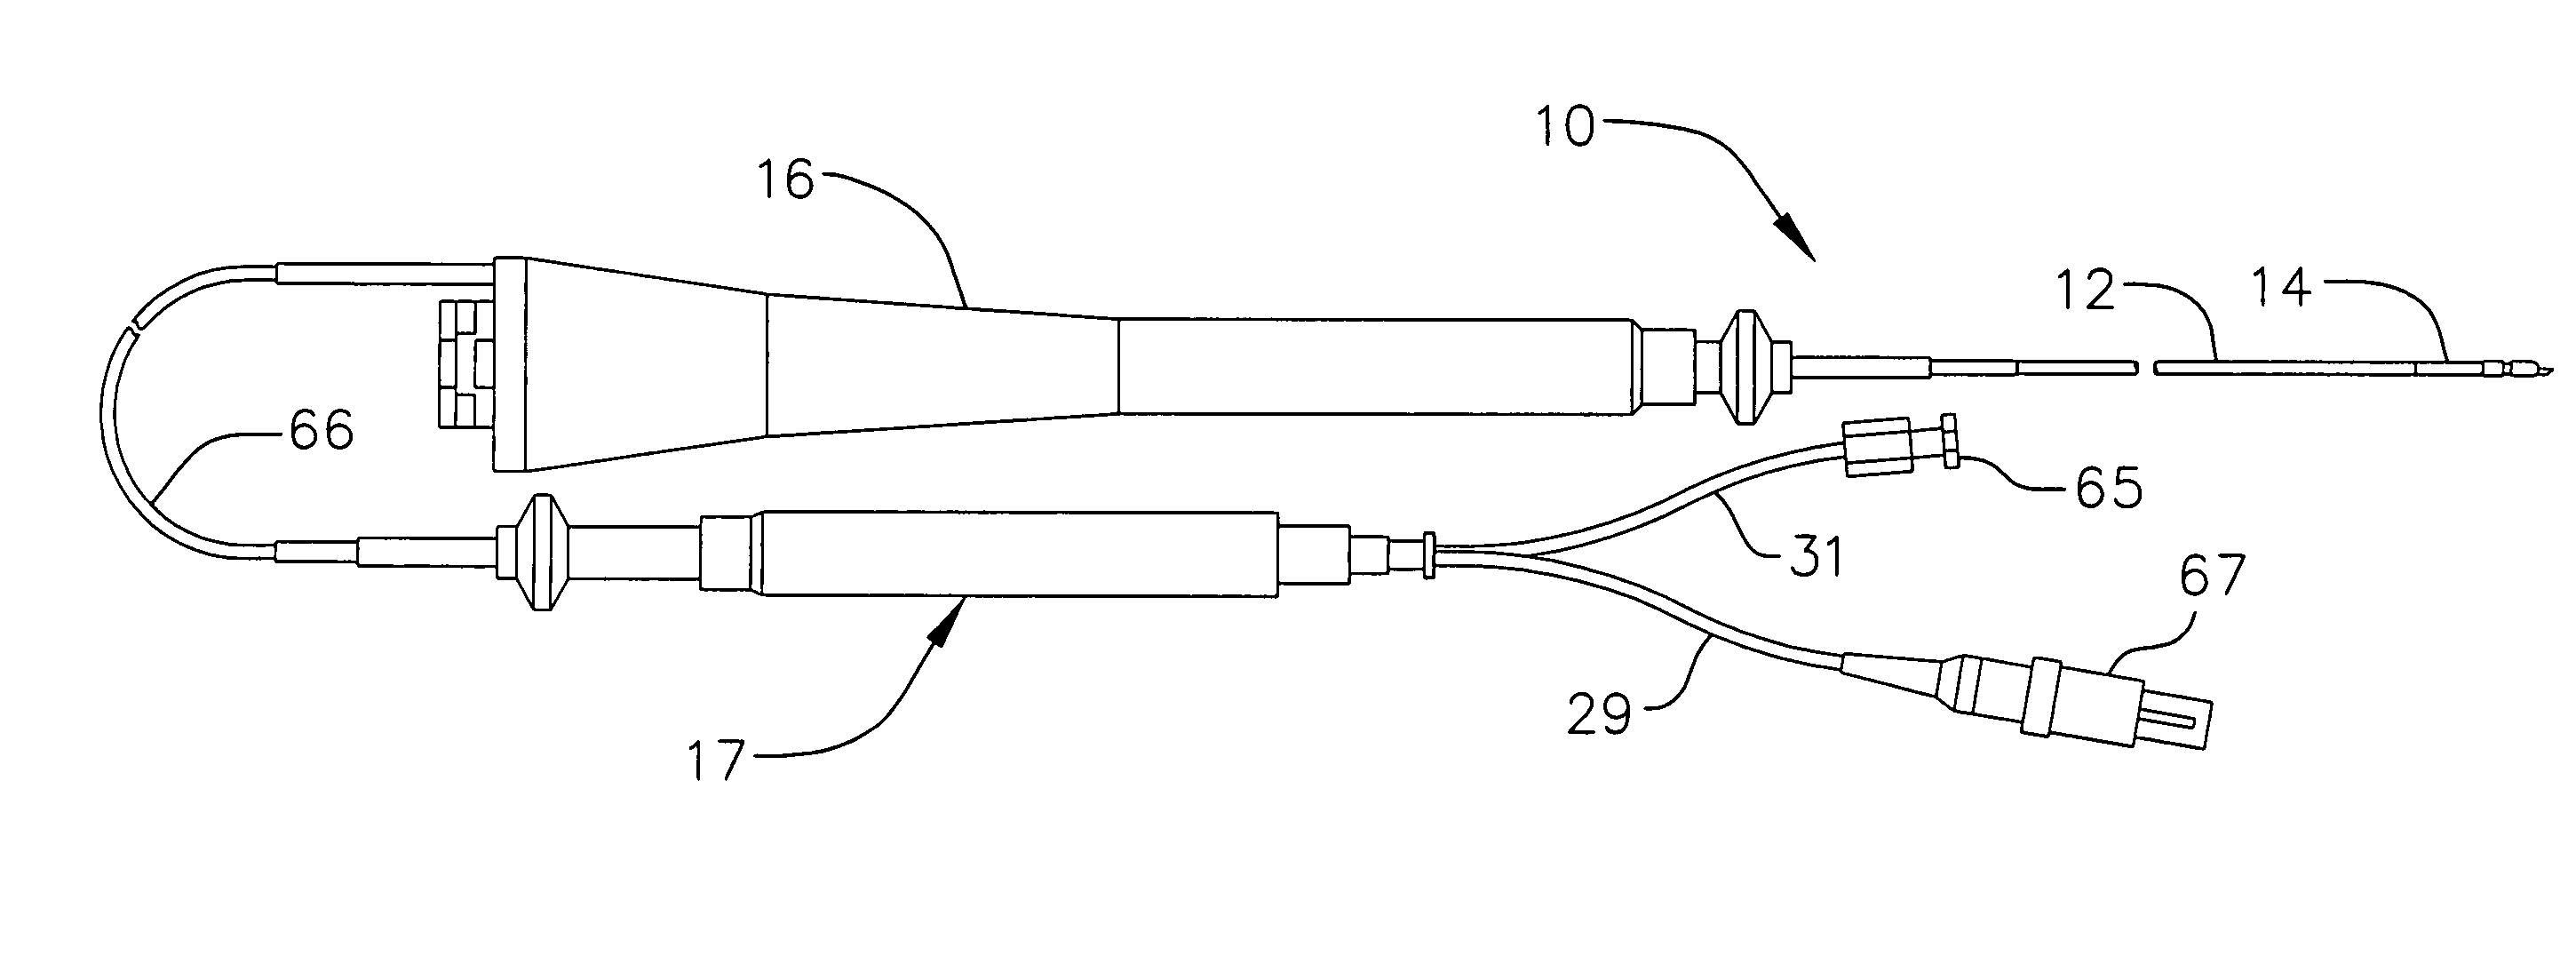 Method for ablating with needle electrode